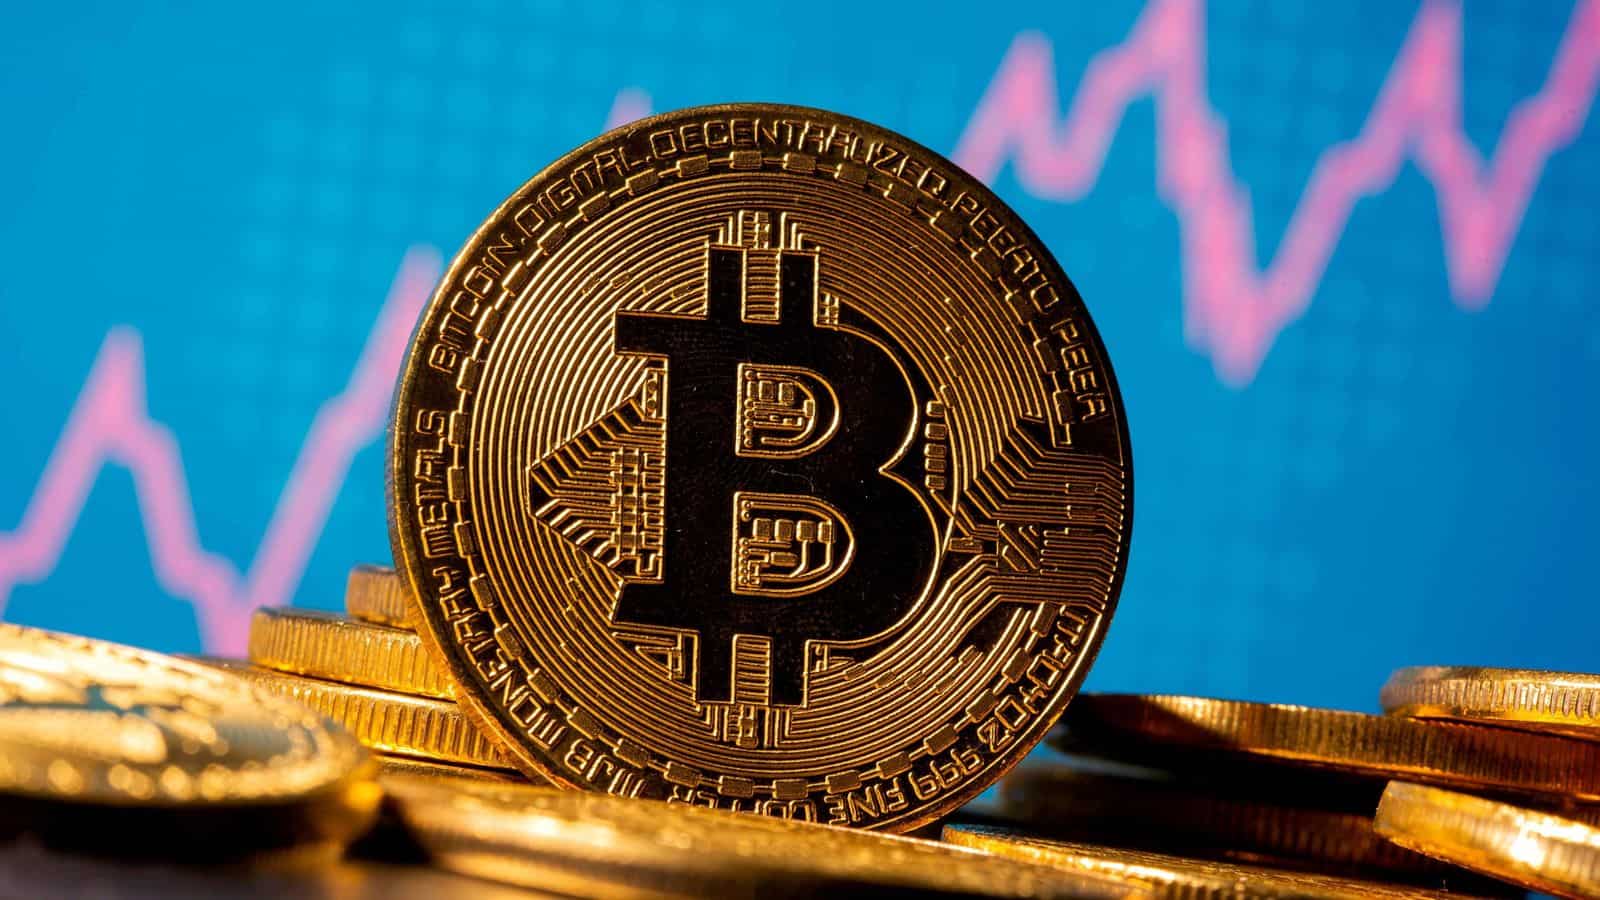 Bitcoin (BTC) surged to one-week highs, reaching the $29,700s